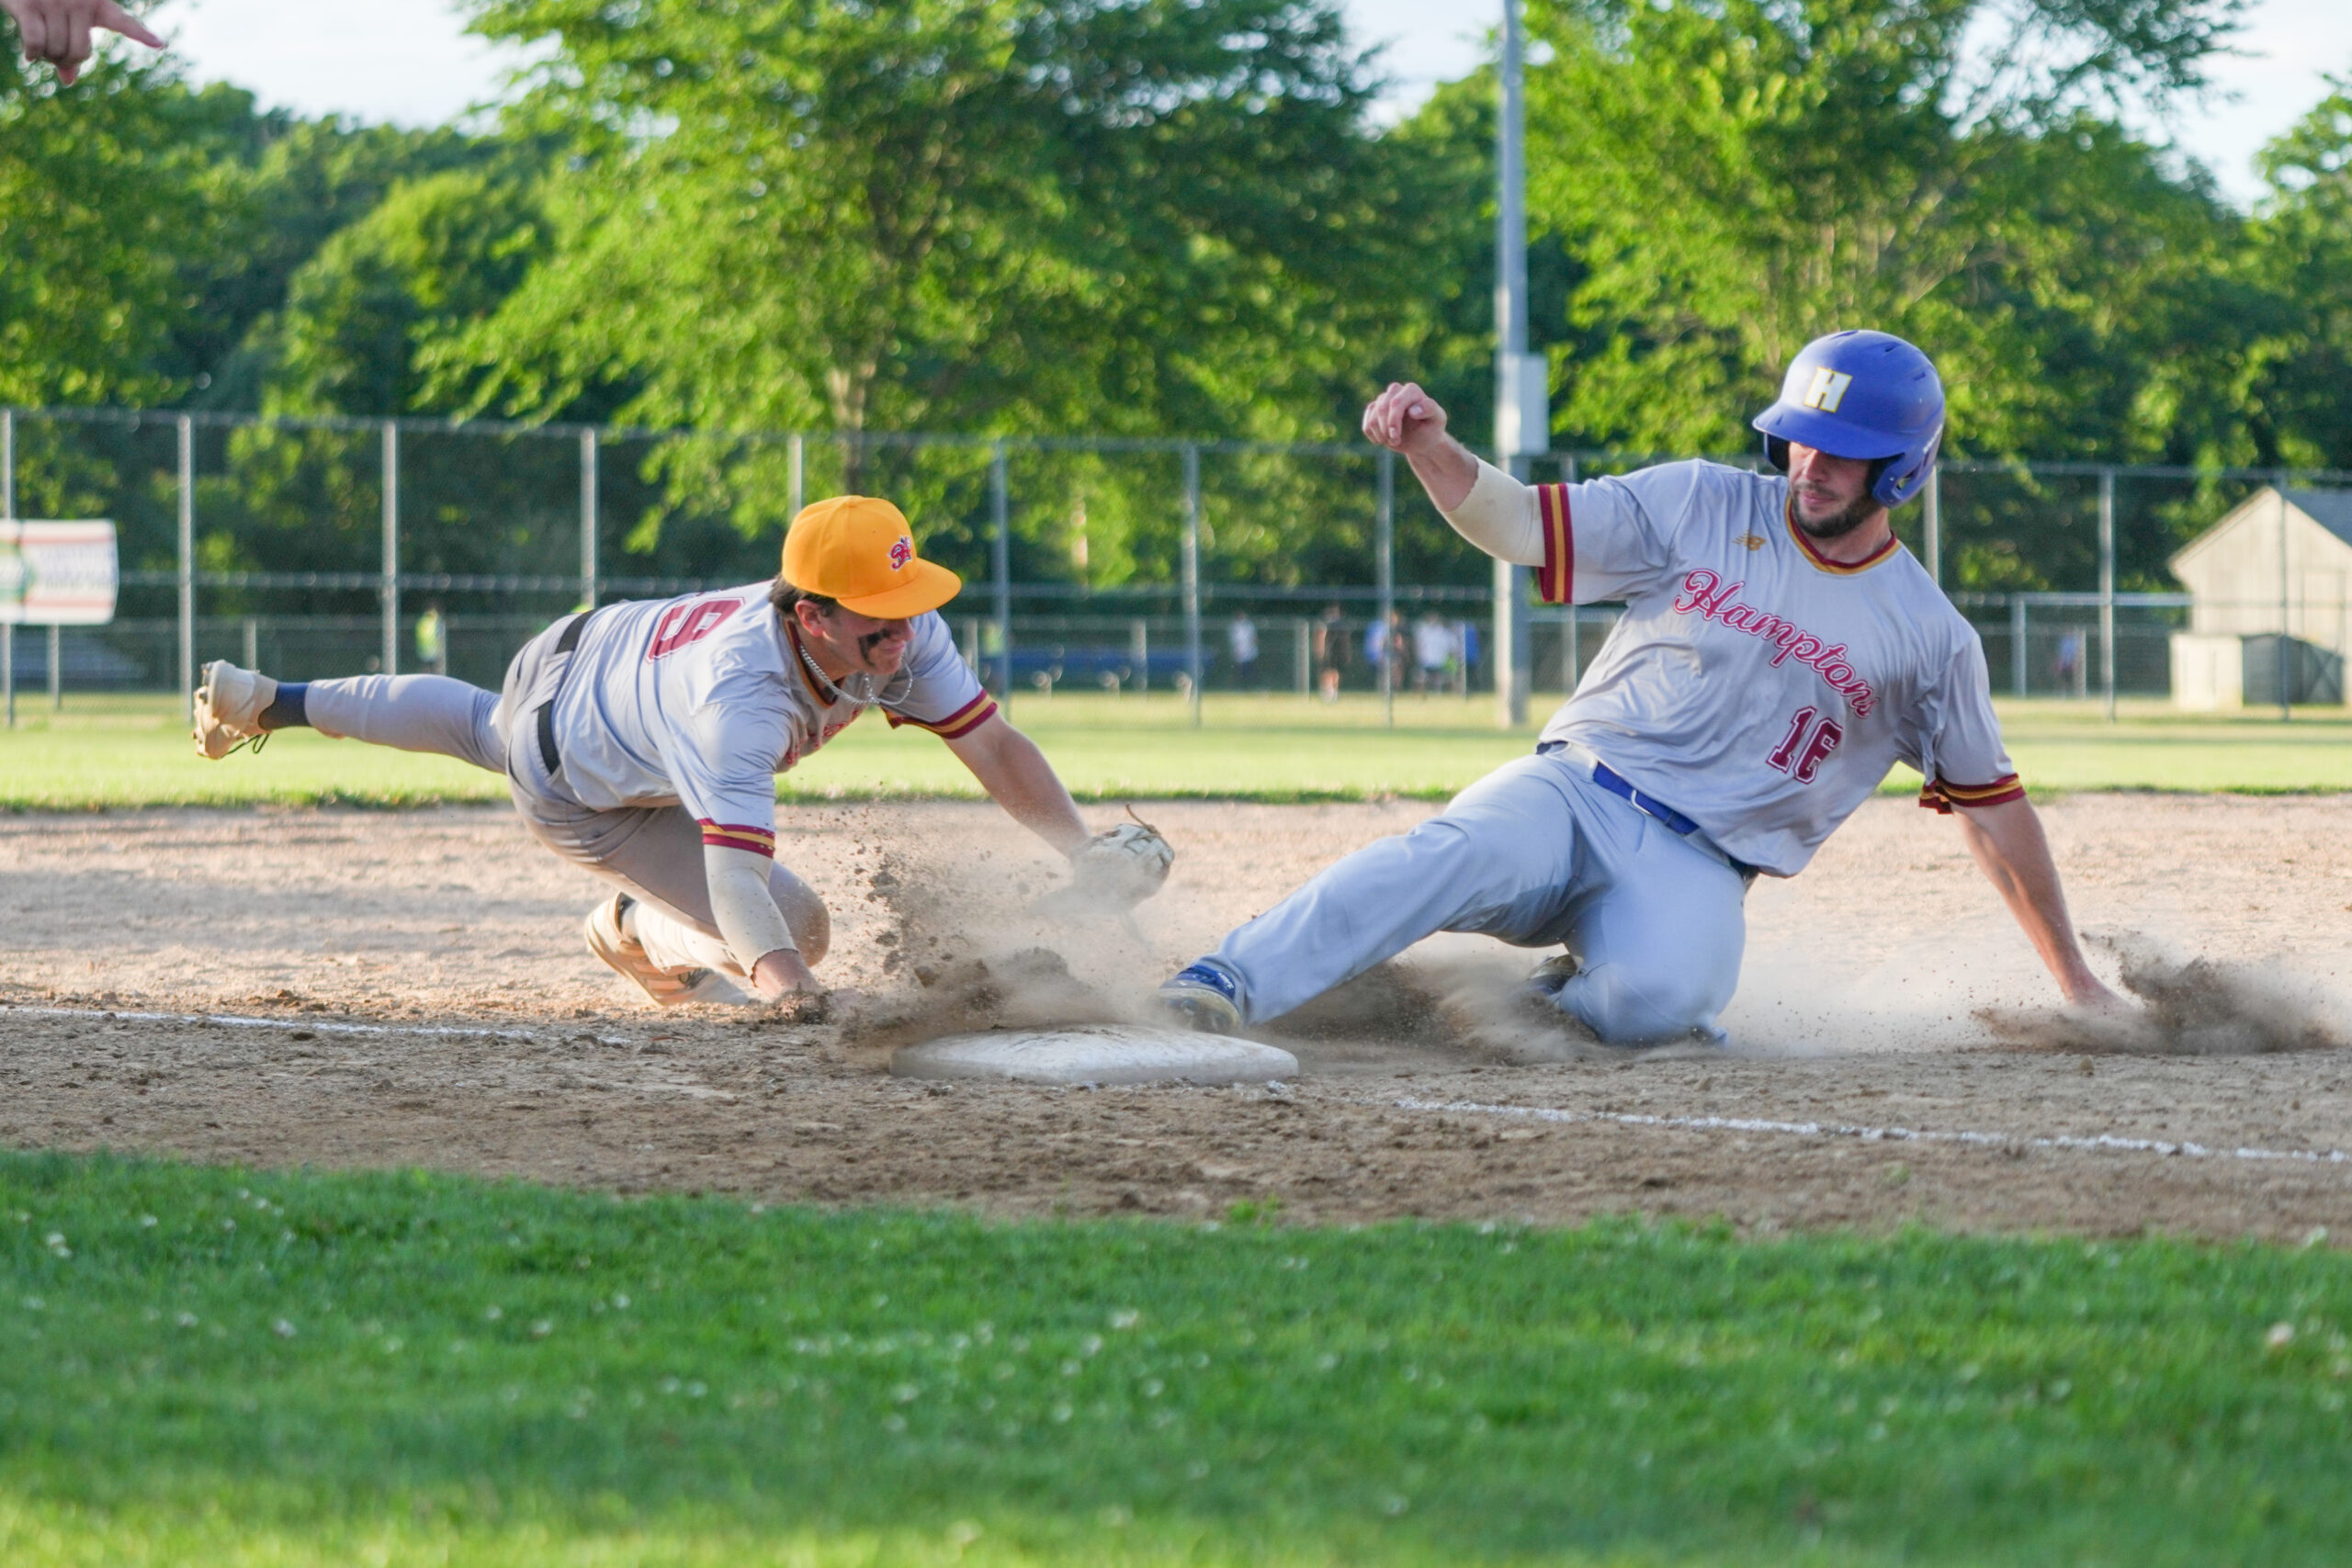 Red Team All-Star Sean Flaherty (Southampton/Hofstra) slides in safely at third base ahead of Gold Team All-Star Matt Shuhet's tag.   RON ESPOSITO